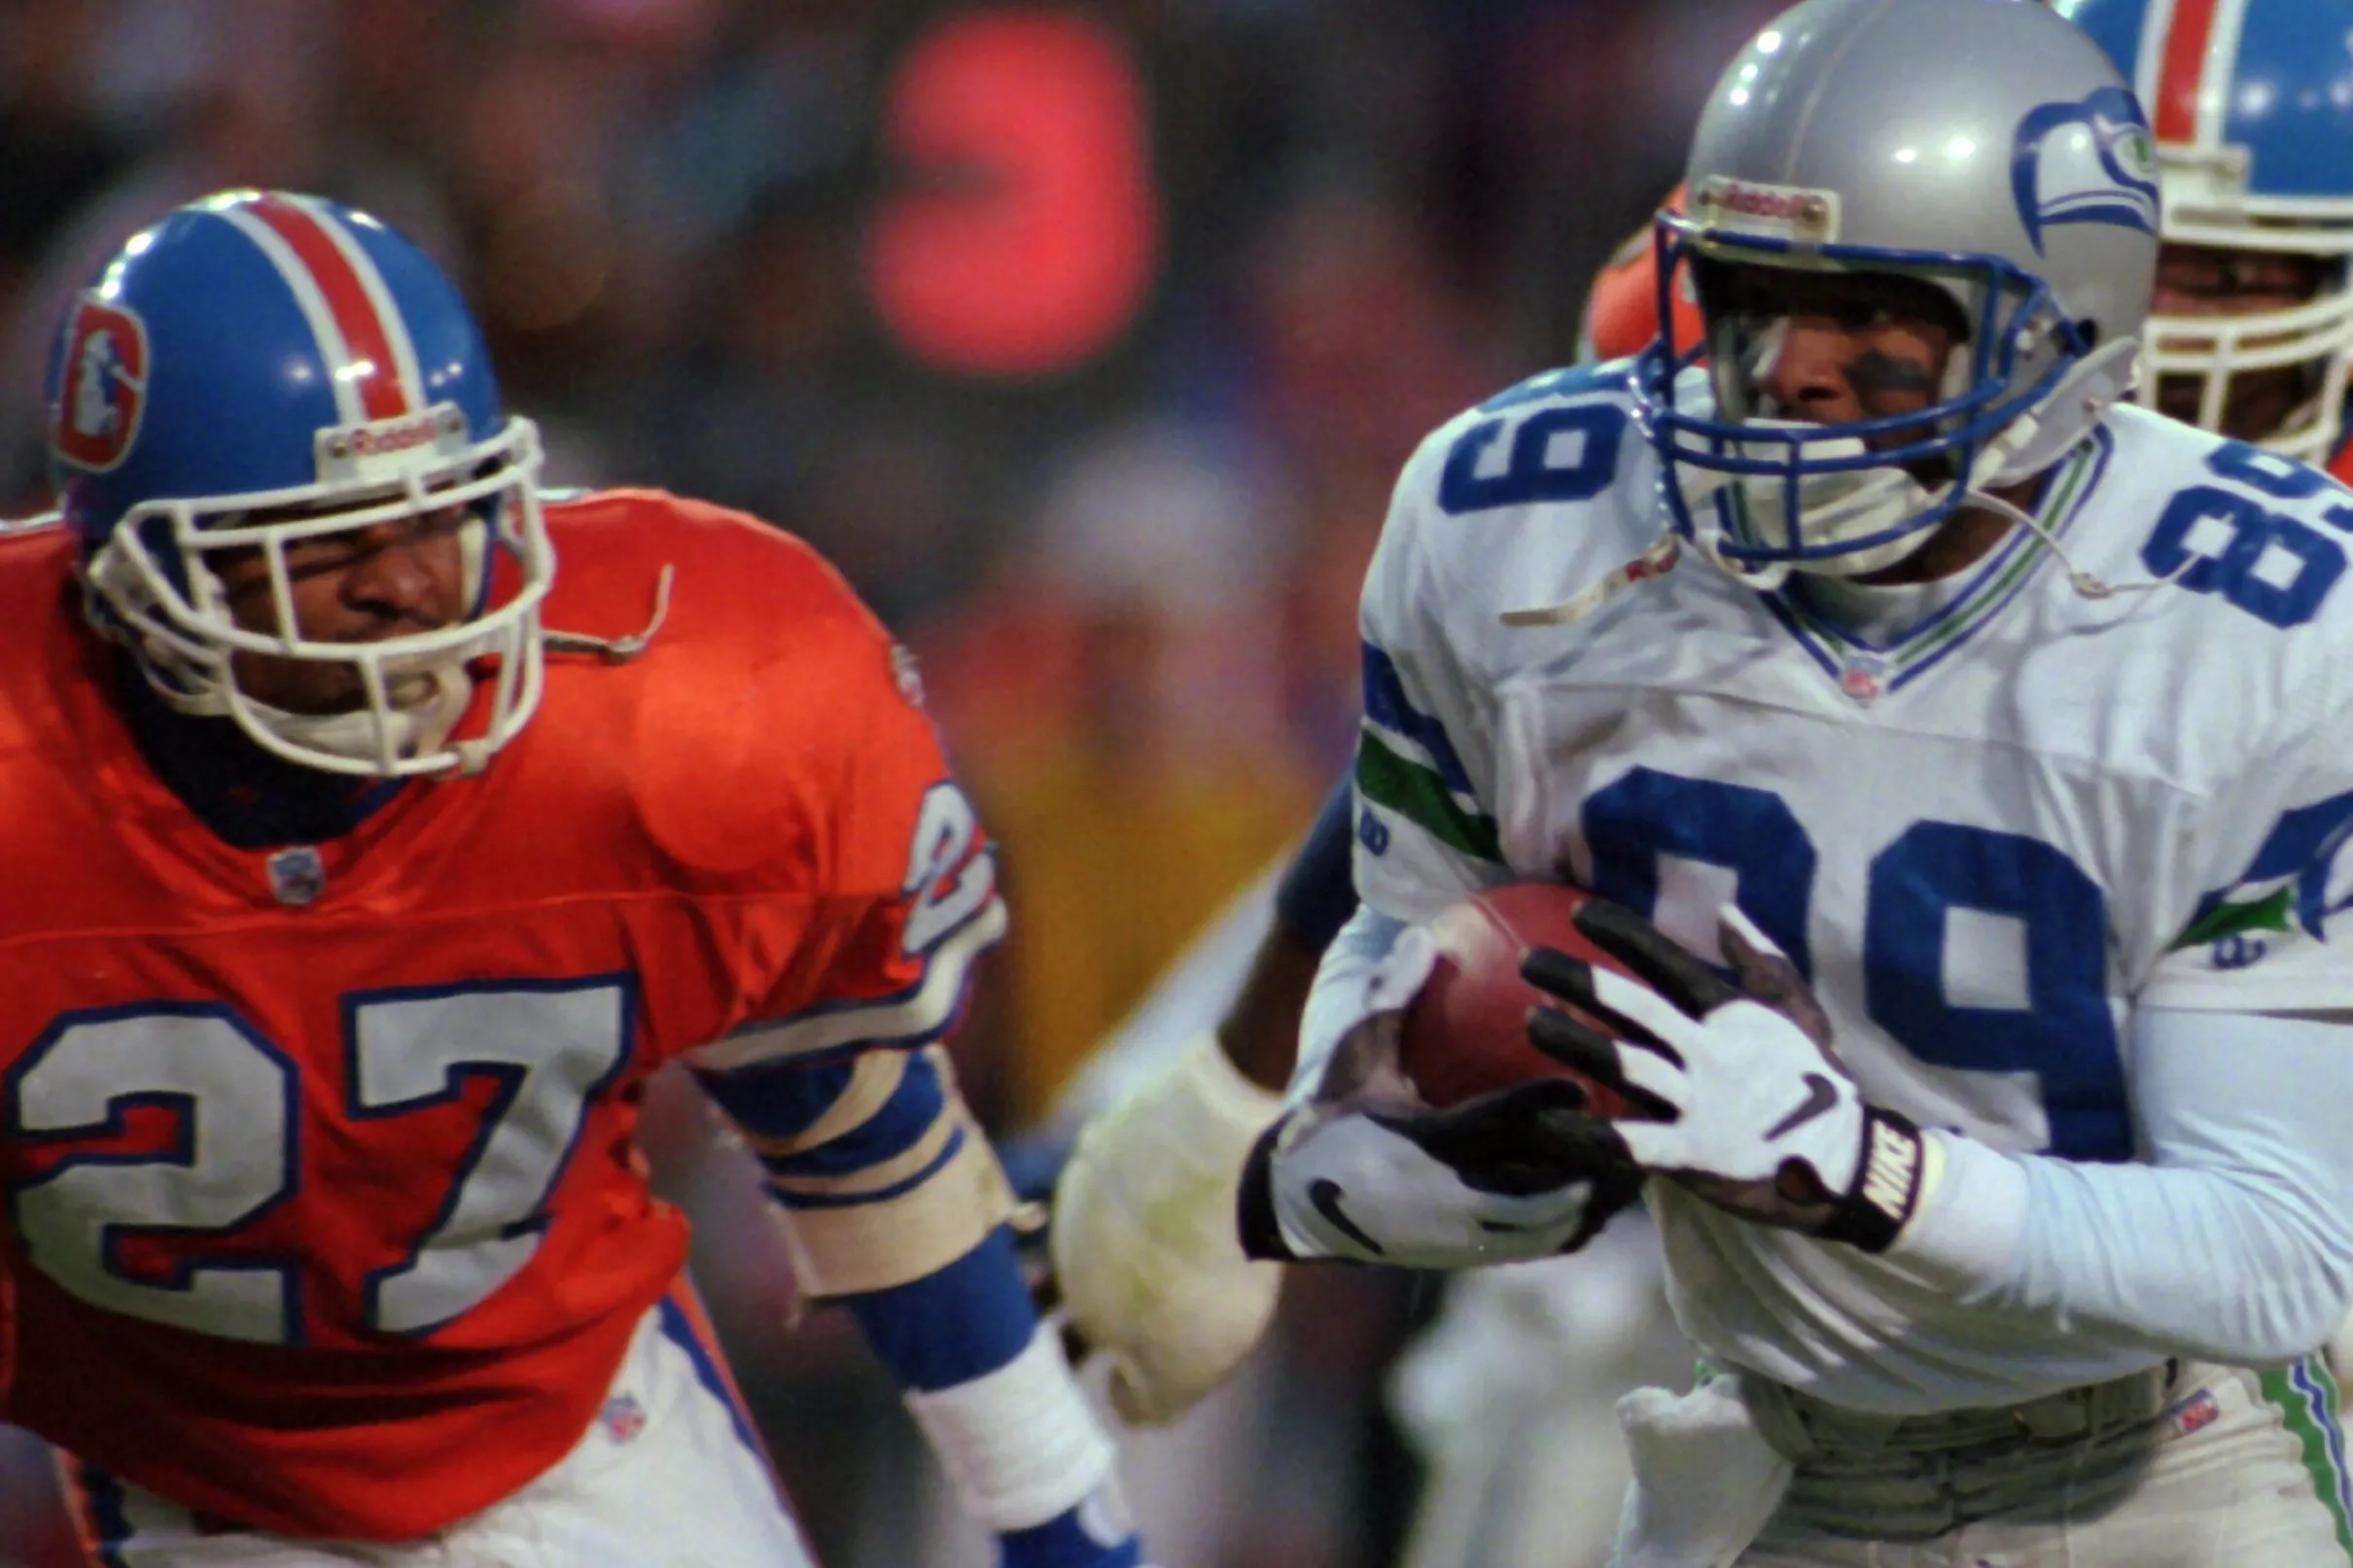 Reason #21 - Steve Atwater was ‘the enforcer’ for the Broncos’ defense